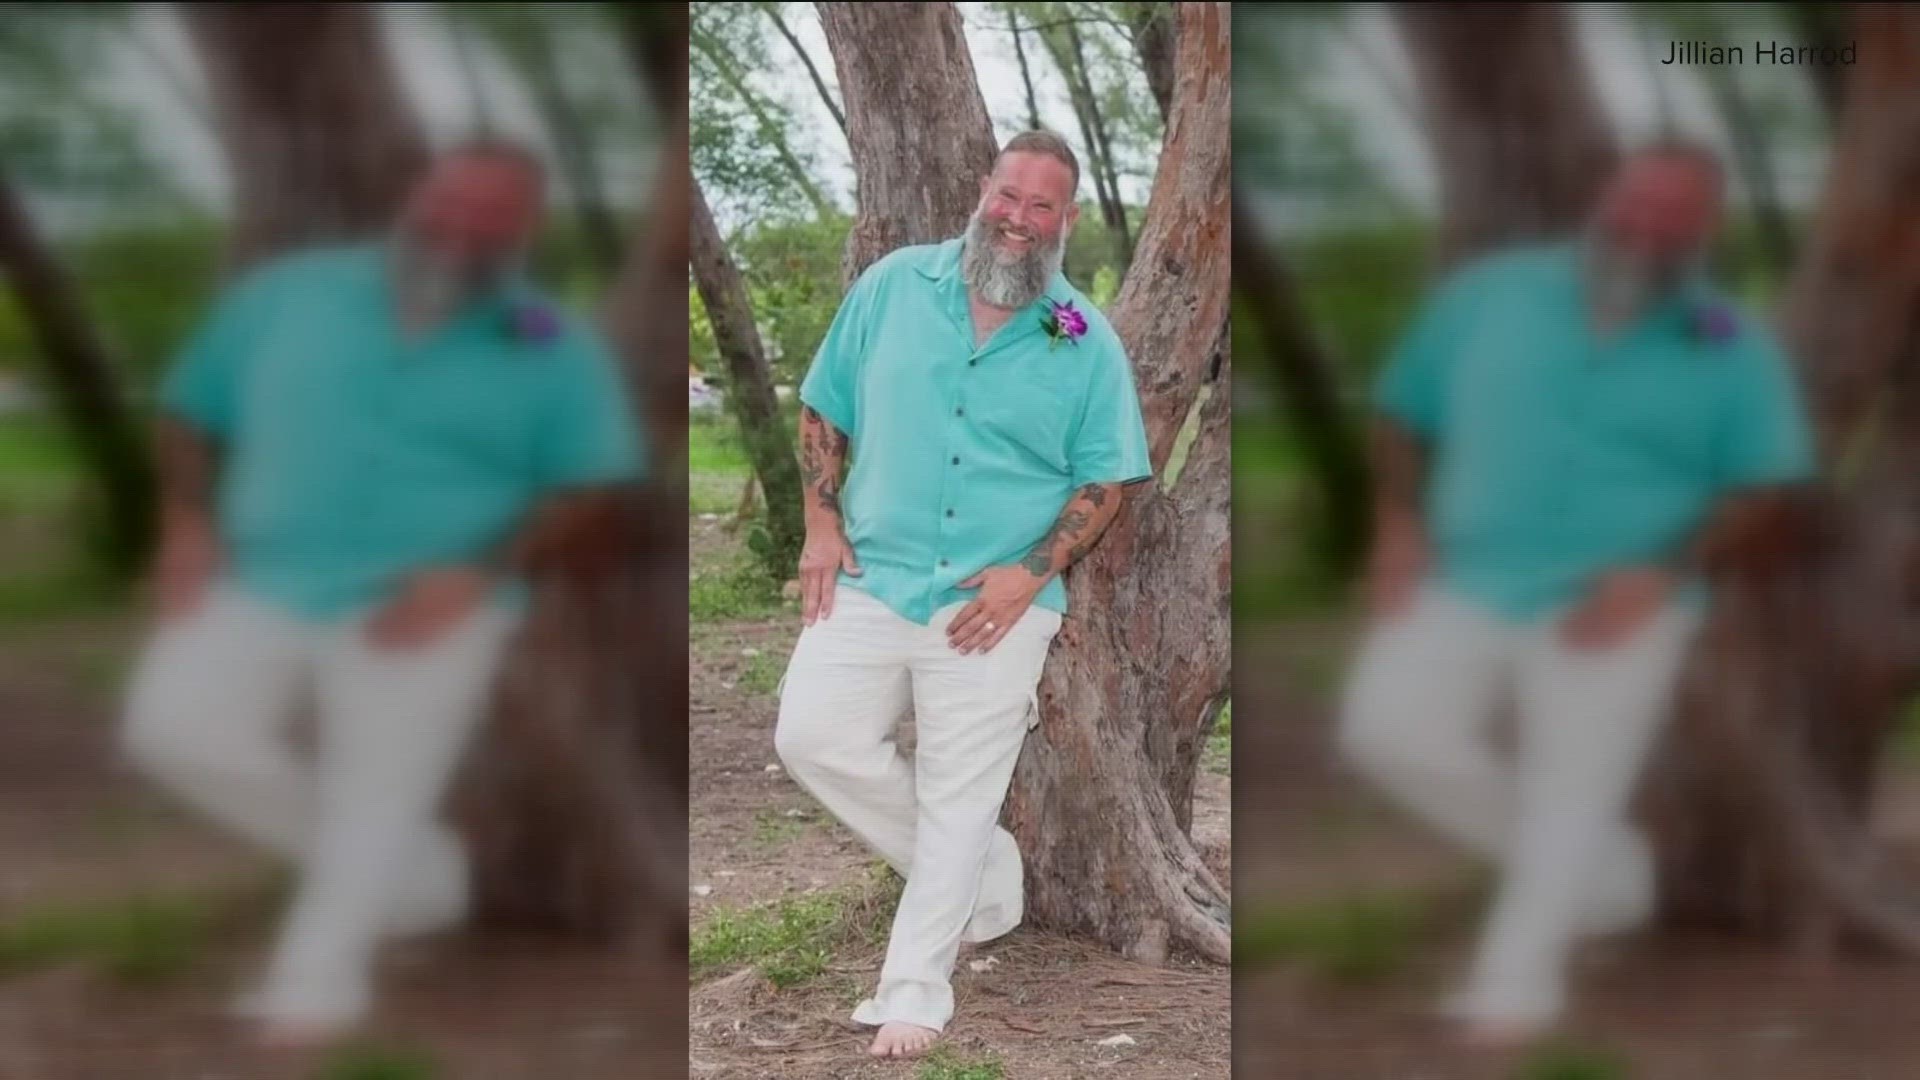 The family of Justin Harrod is suing Llano County after a 2022 fatal shooting. Deputies opened fire on him during a mental health crisis, the lawsuit says.